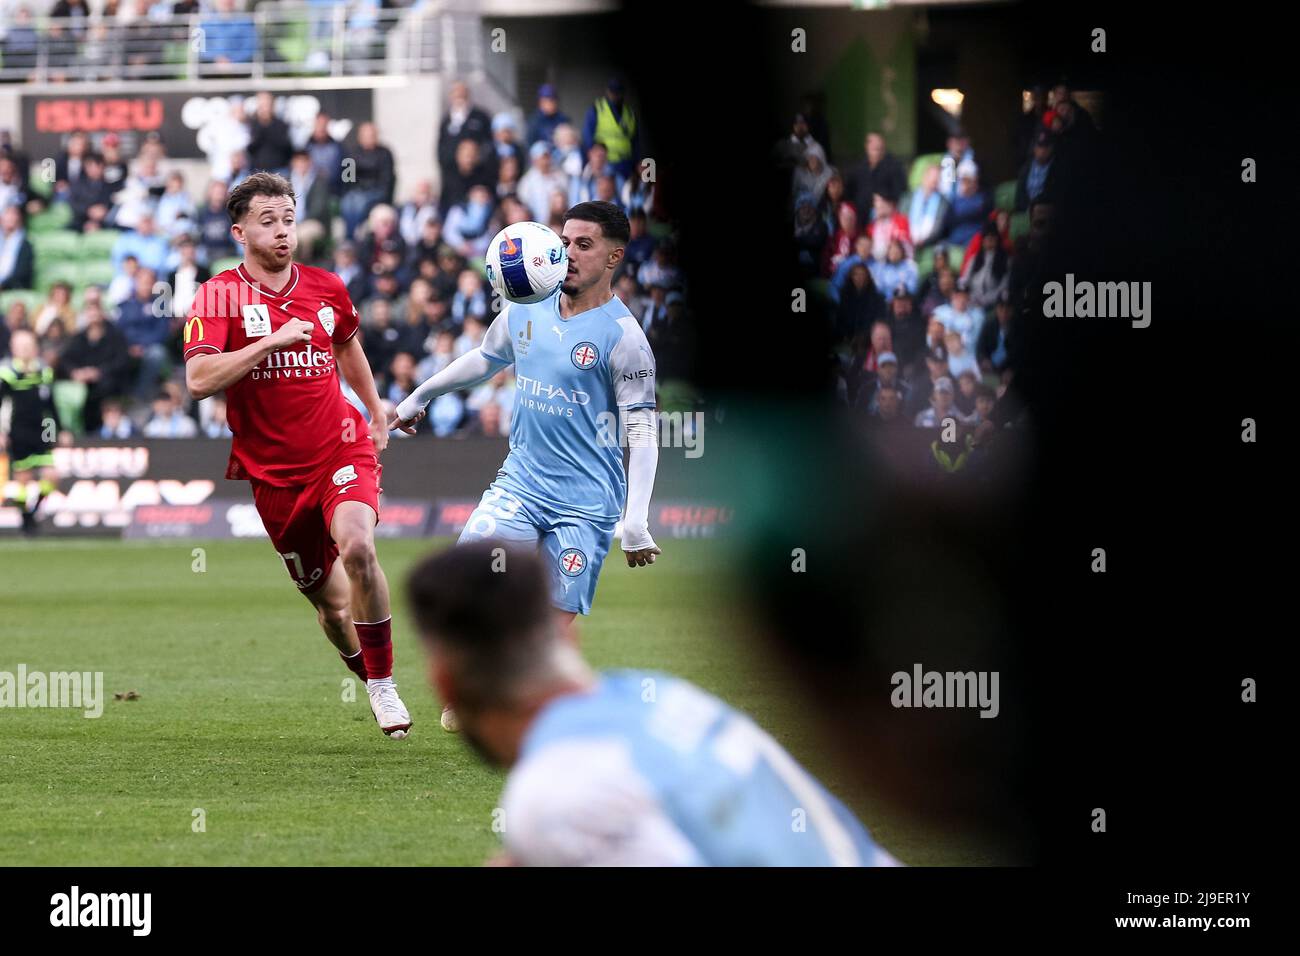 Melbourne, Australia, 22 May, 2022. Marco Tilio of Melbourne City FC heads the ball during the A-League Semi Final soccer match between Melbourne City FC and Adelaide United at AAMI Park on May 22, 2022 in Melbourne, Australia. Credit: Dave Hewison/Speed Media/Alamy Live News Stock Photo